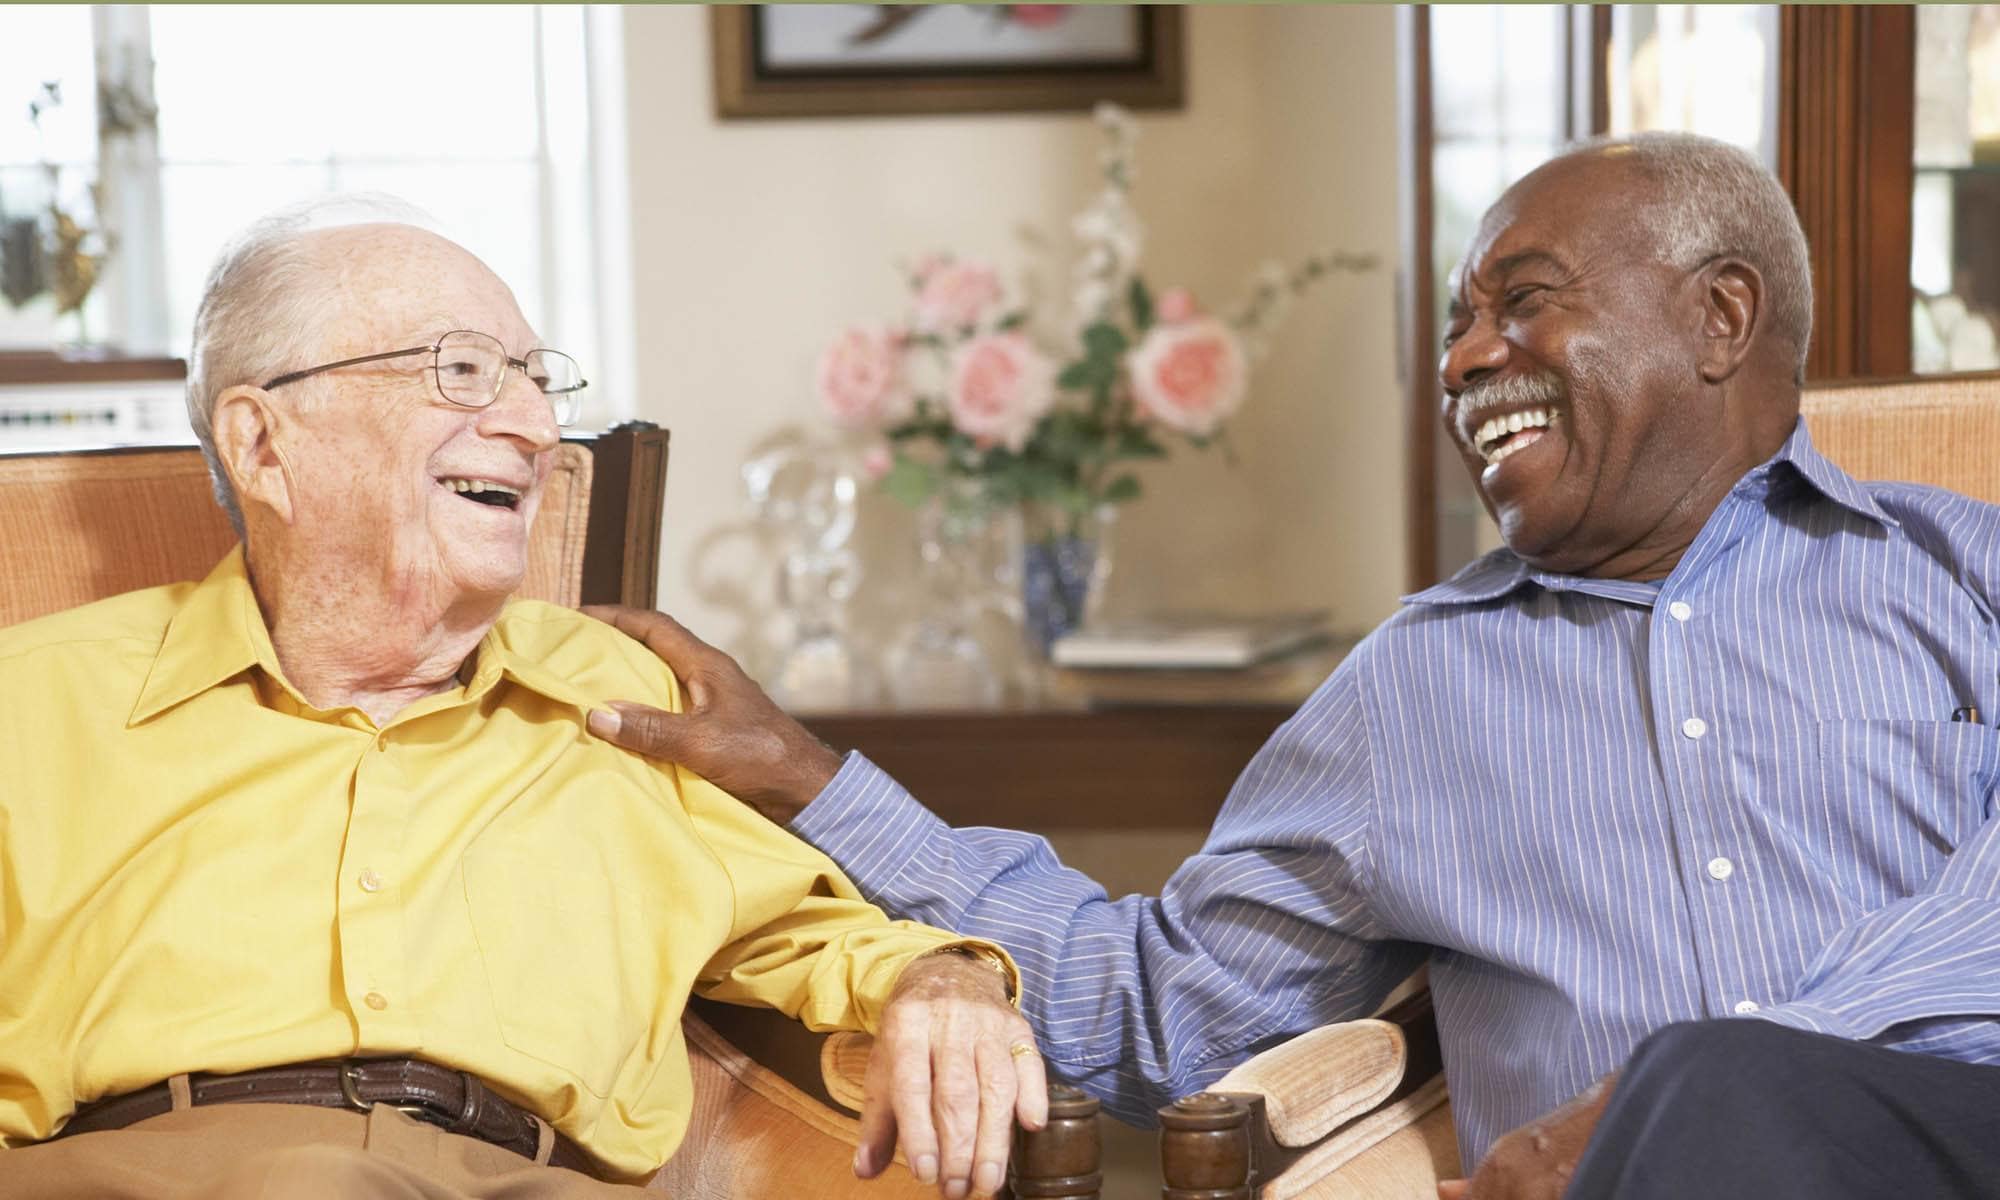 Assisted Living - Department of Aging